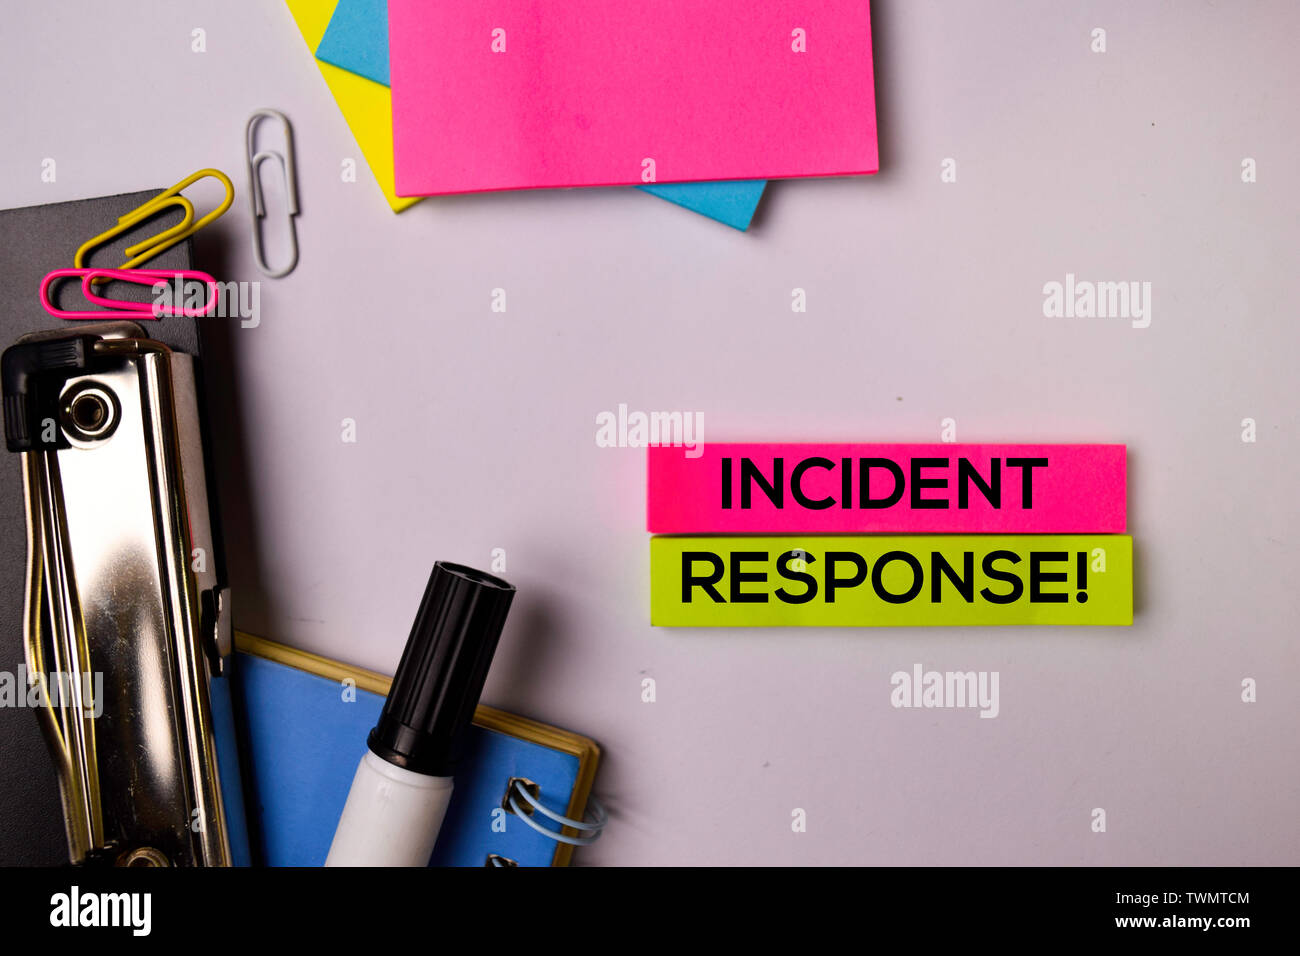 Incident Response! on sticky notes isolated on white background. Stock Photo